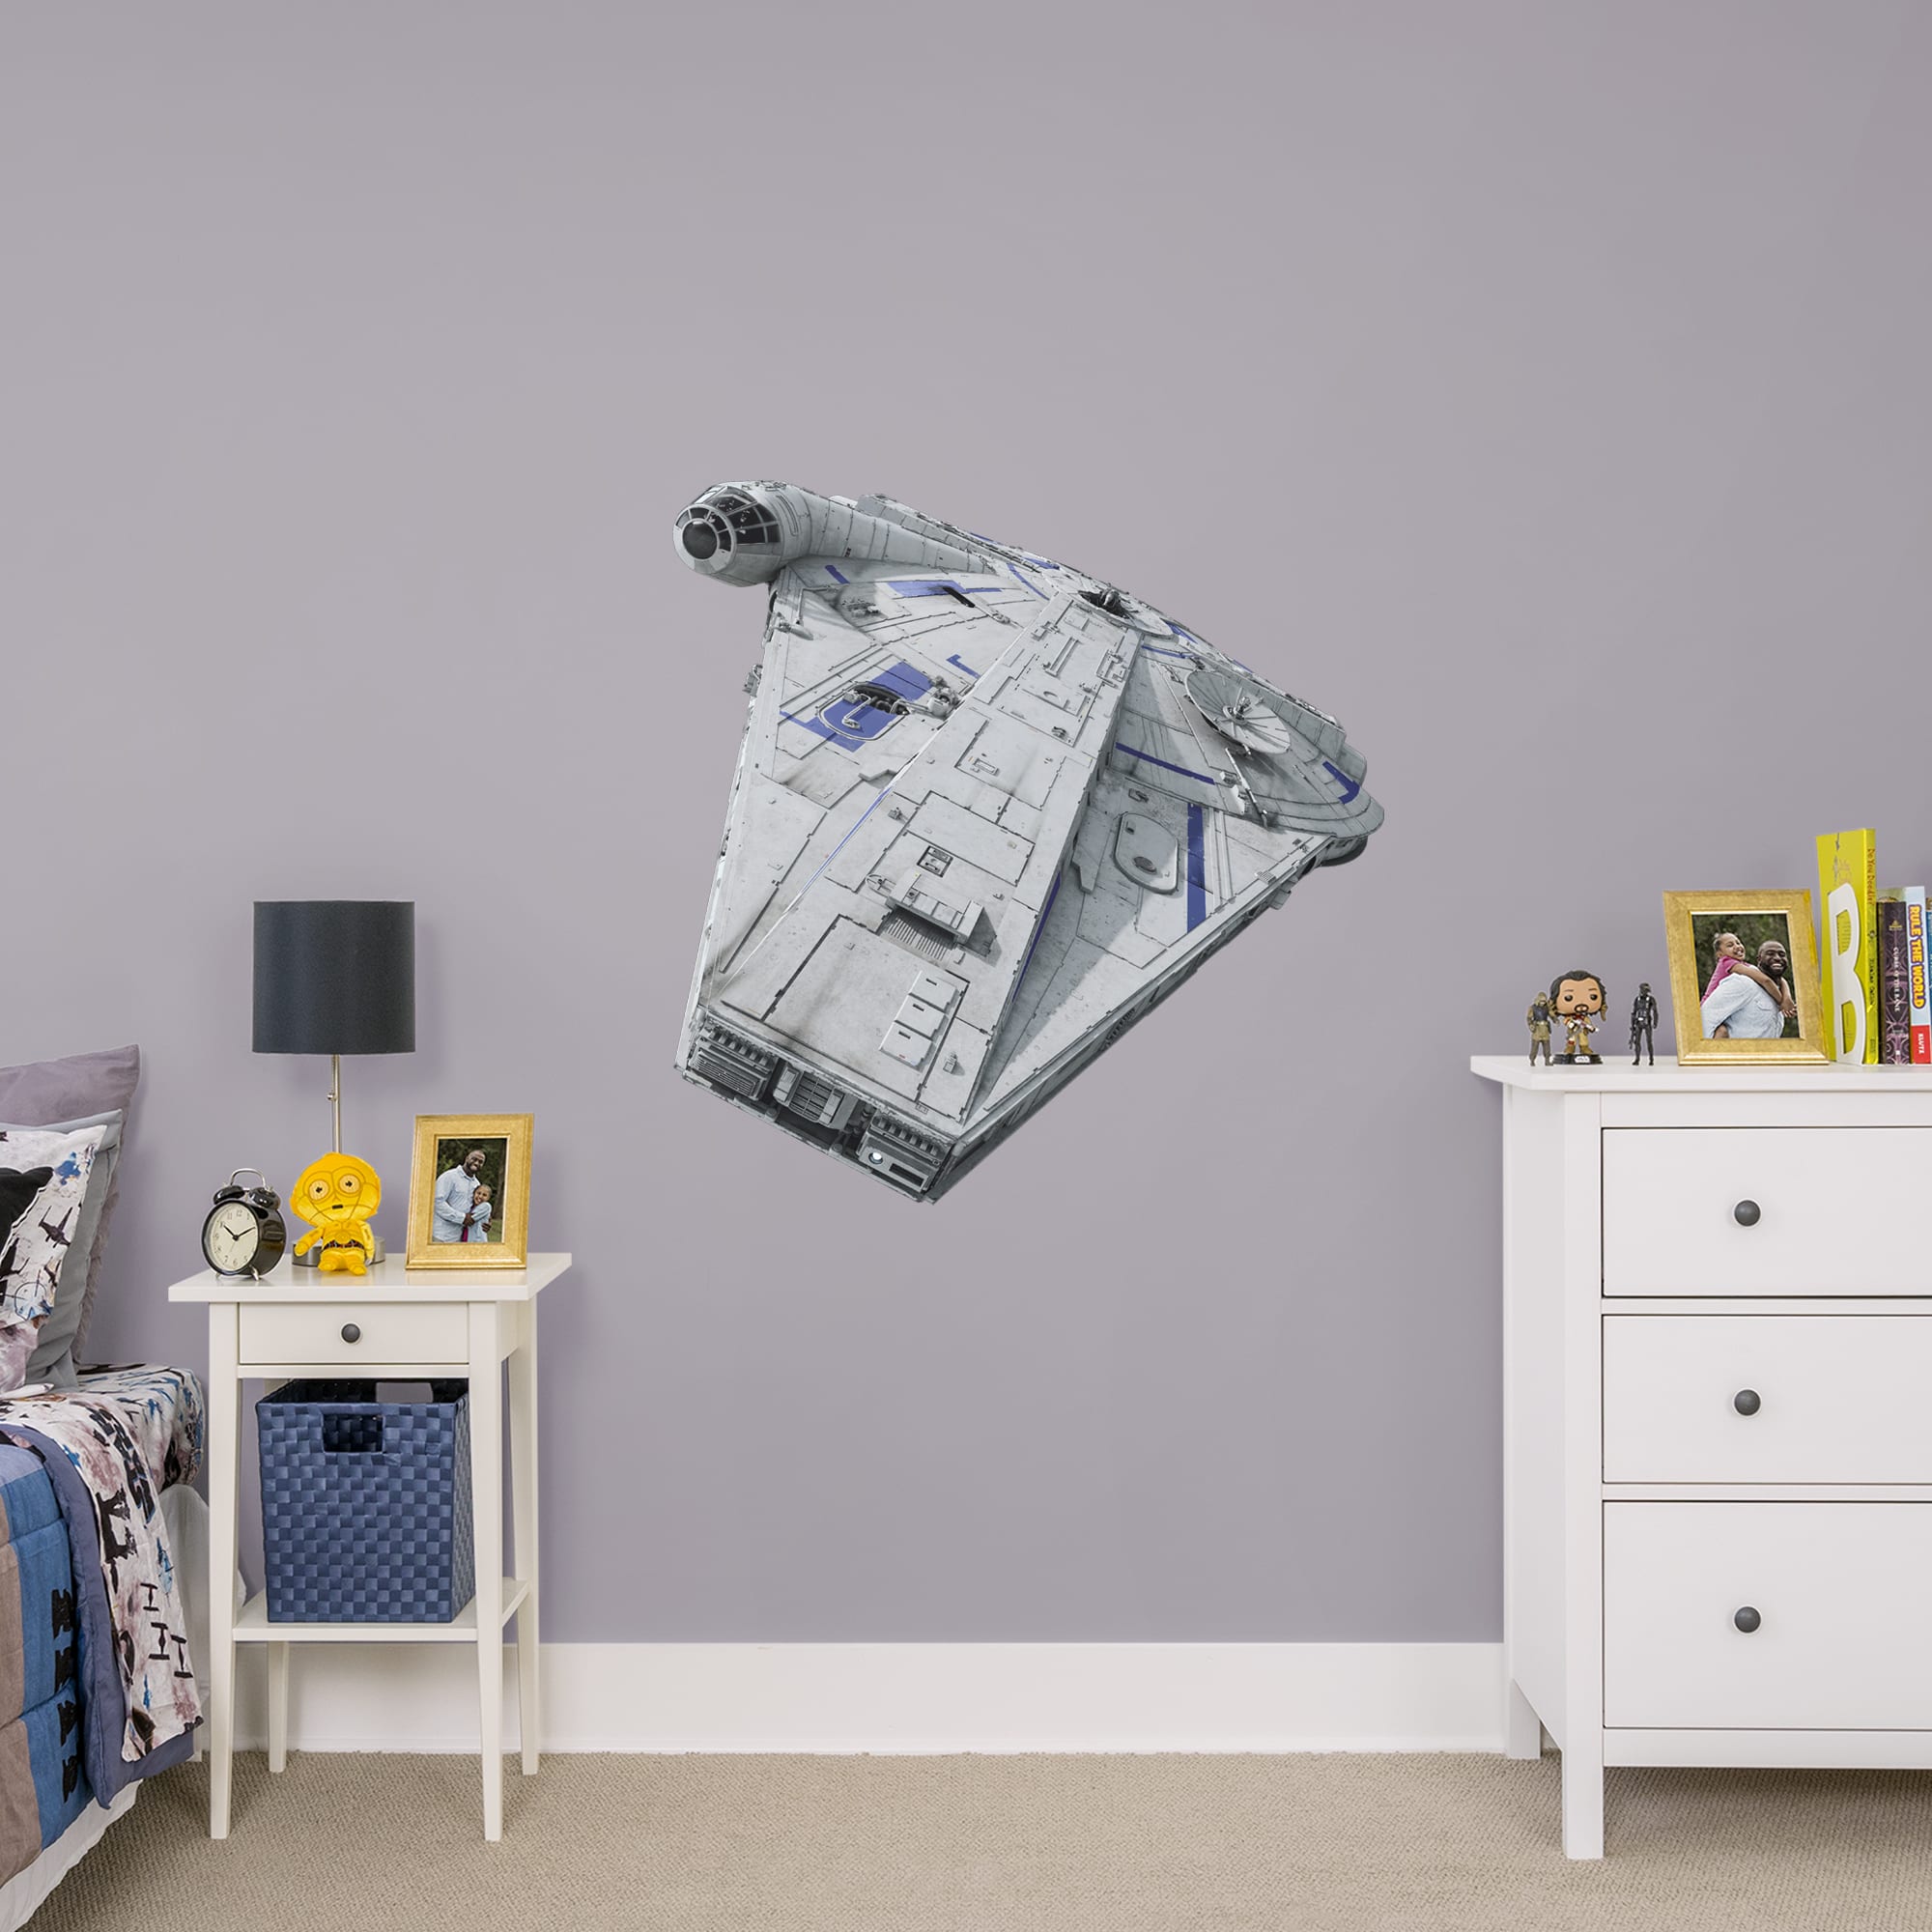 Millennium Falcon - Solo: A Star Wars Story - Officially Licensed Removable Wall Decal Giant Ship + 2 Decals (39"W x 39"H) by Fa